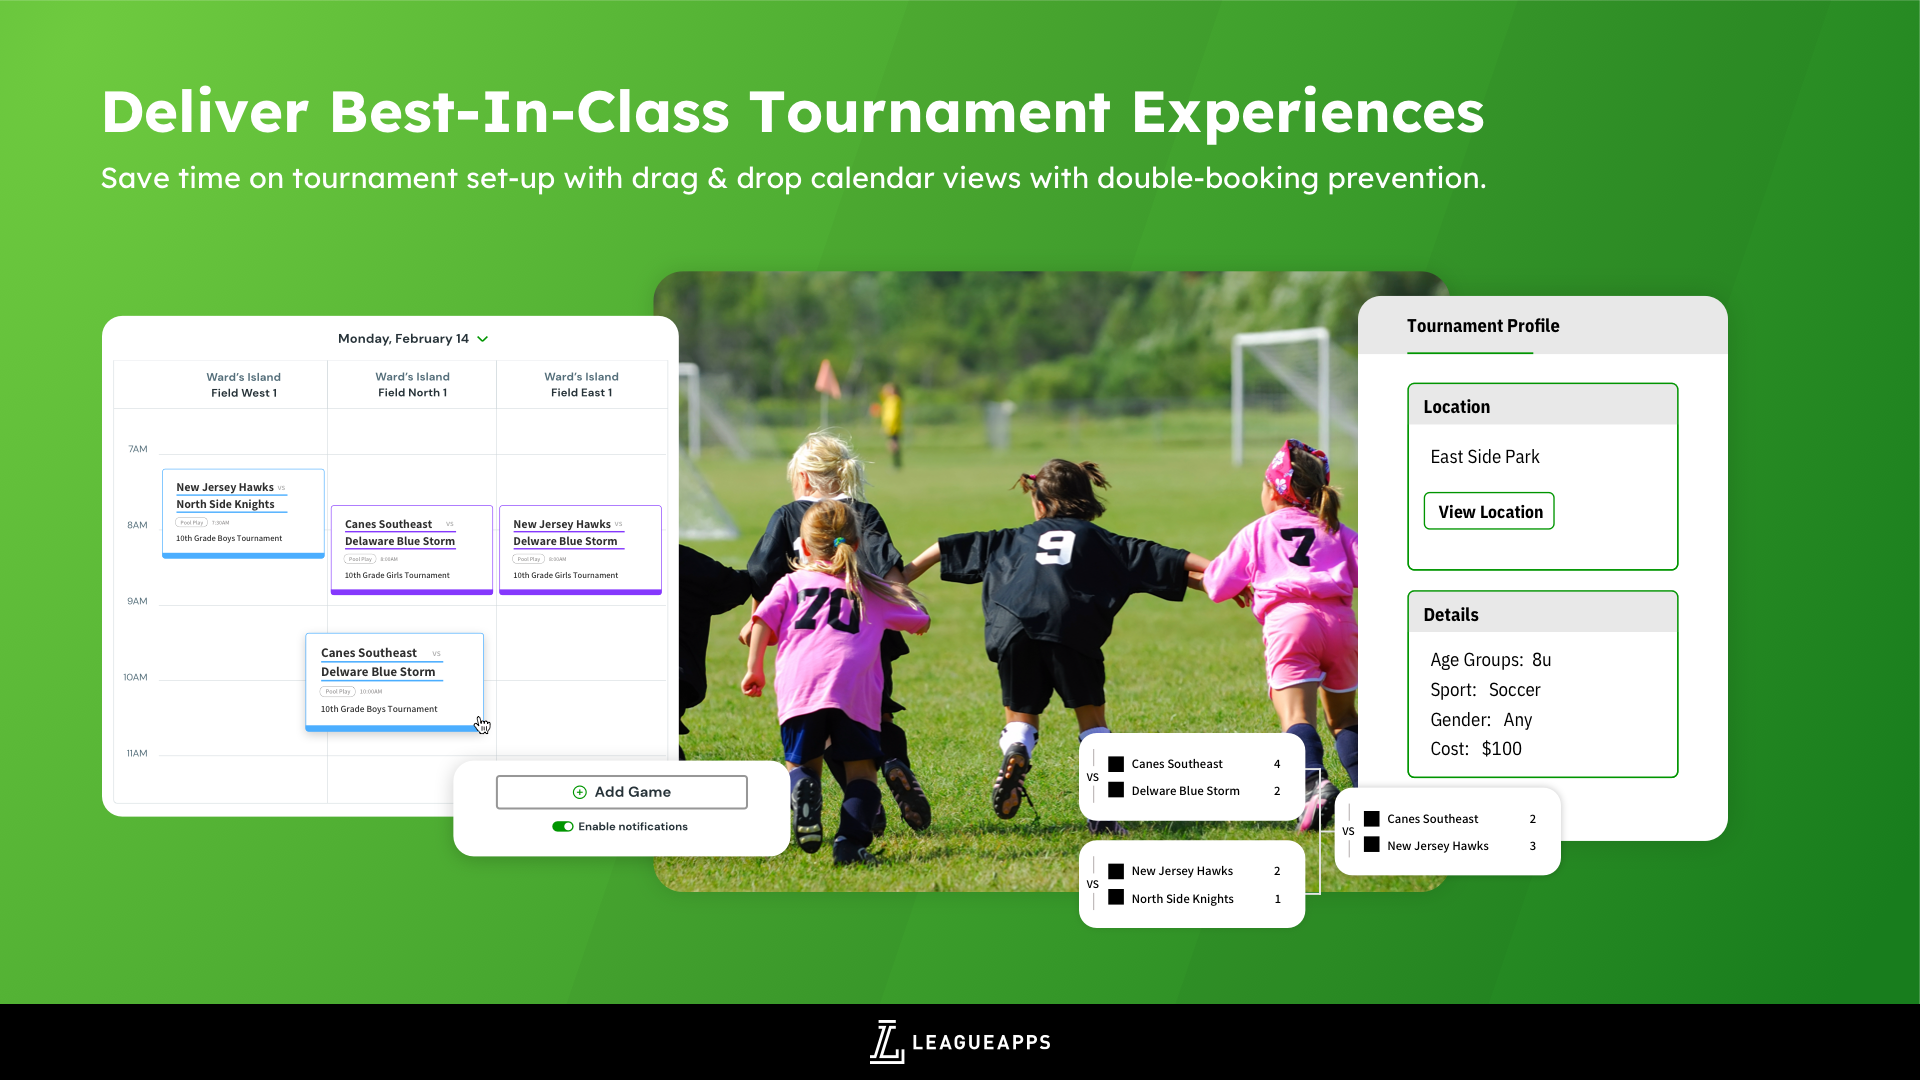 Save time on tournament set-up with drag and drop calendar views and double-booking prevention. 